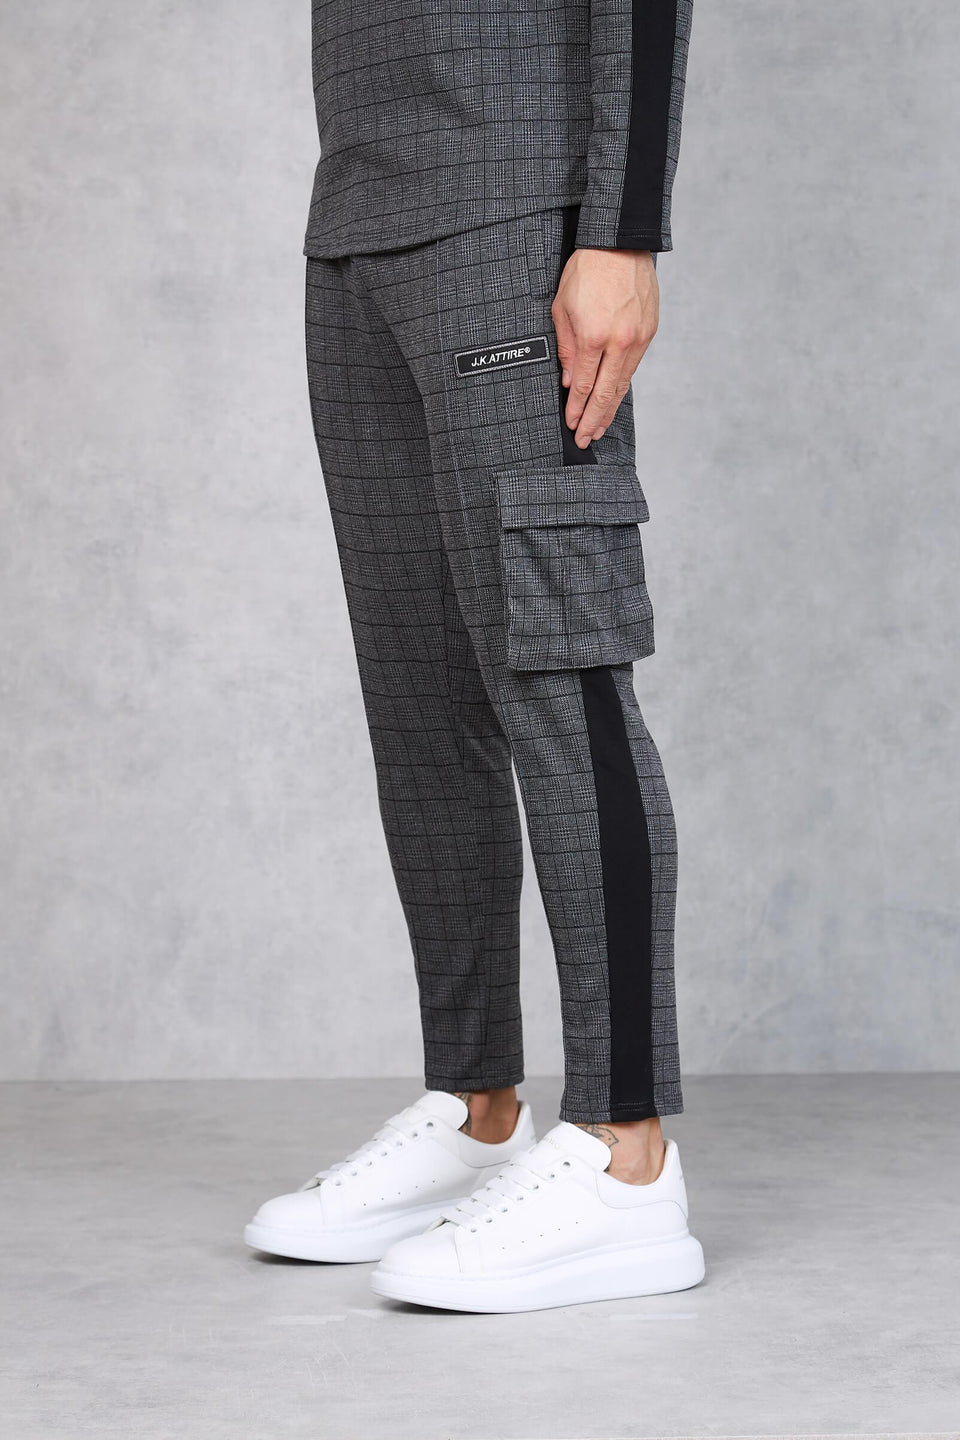 Nonstop Check Cropped Trouser